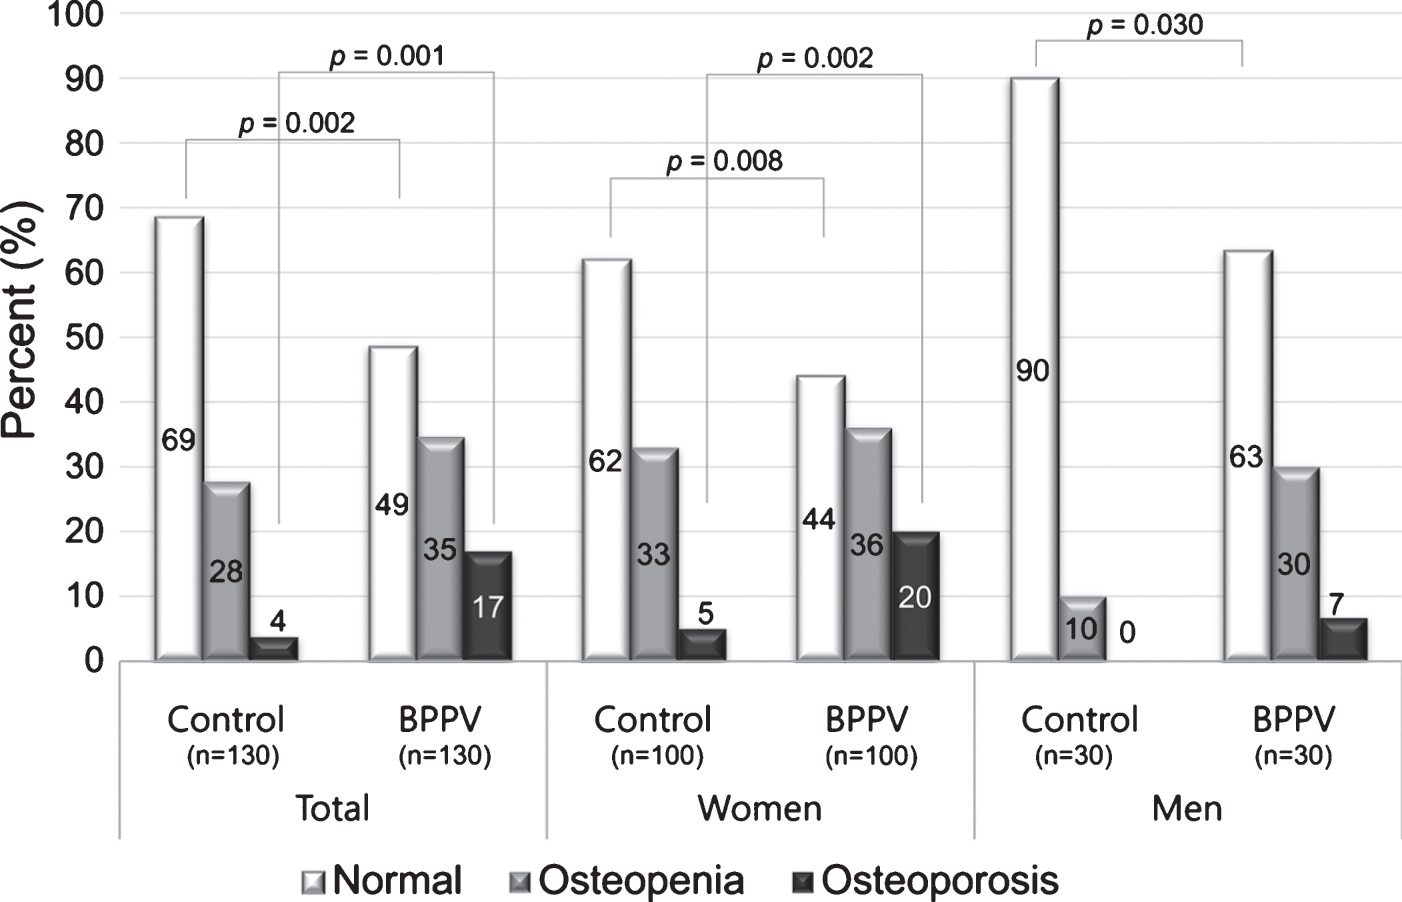 Proportions of osteopenia and osteoporosis in BPPV patients and control groups according to sex. The proportion of osteoporosis (T-score ≤ –2.5) was higher in BPPV patients than controls.